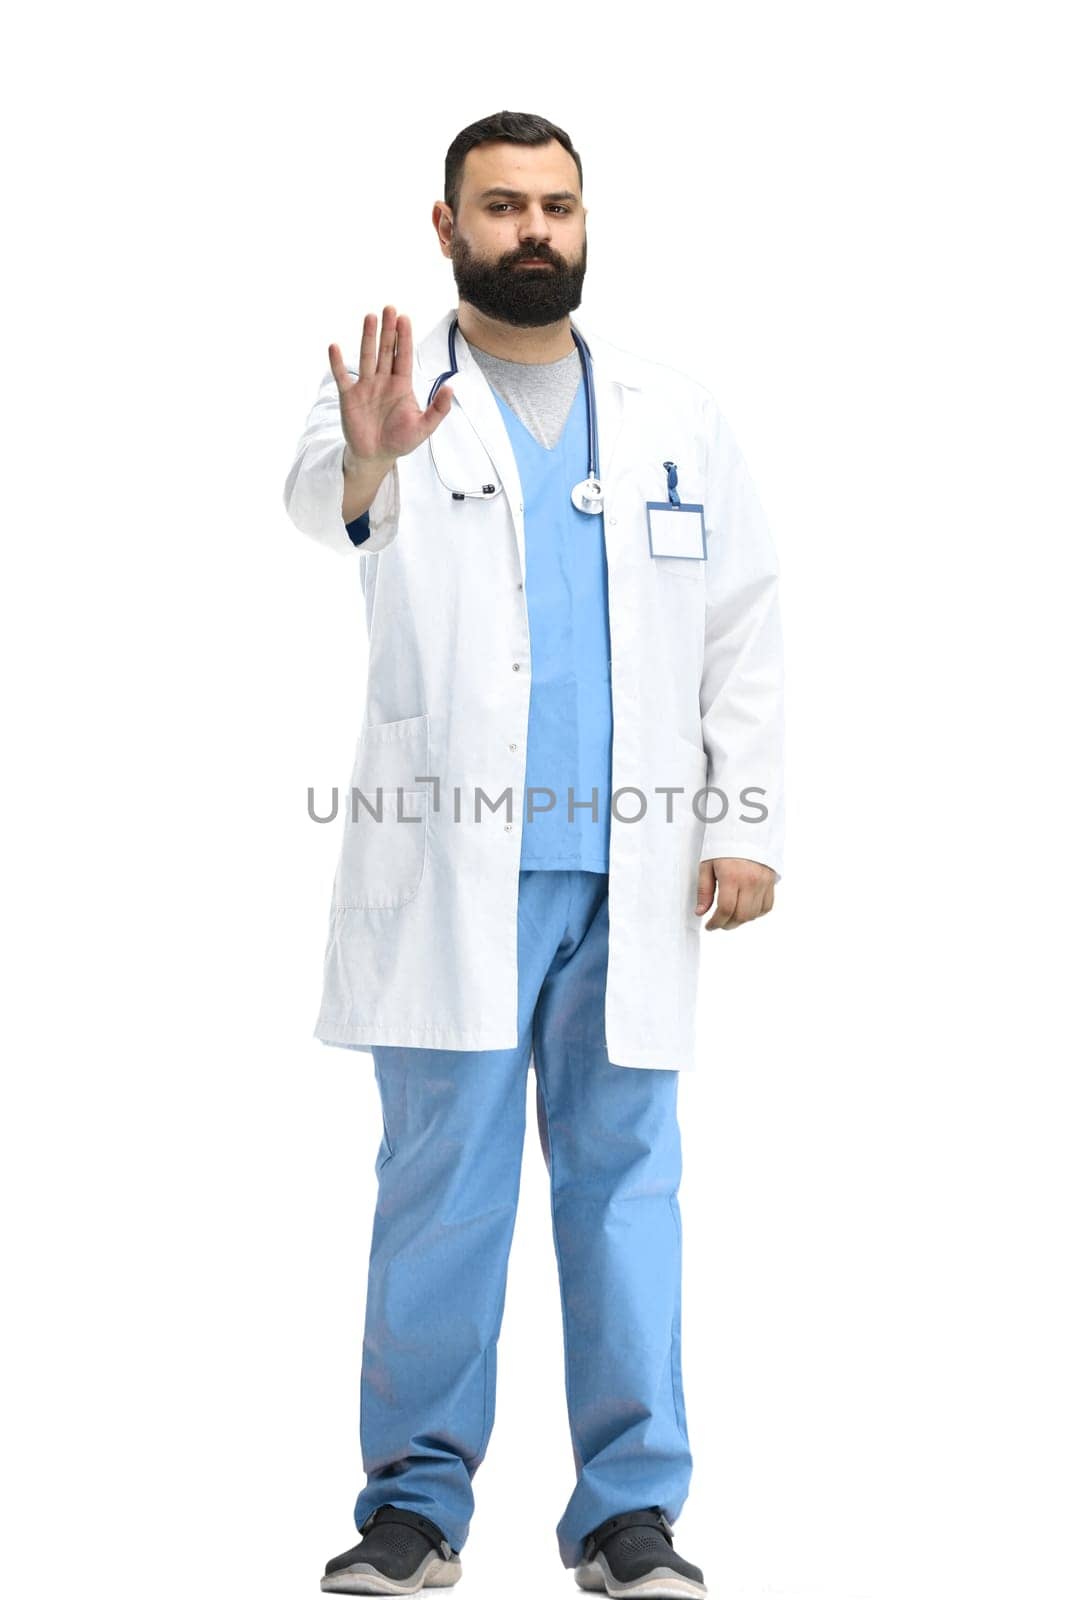 Male doctor, full-length, on a white background, shows a stop sign.